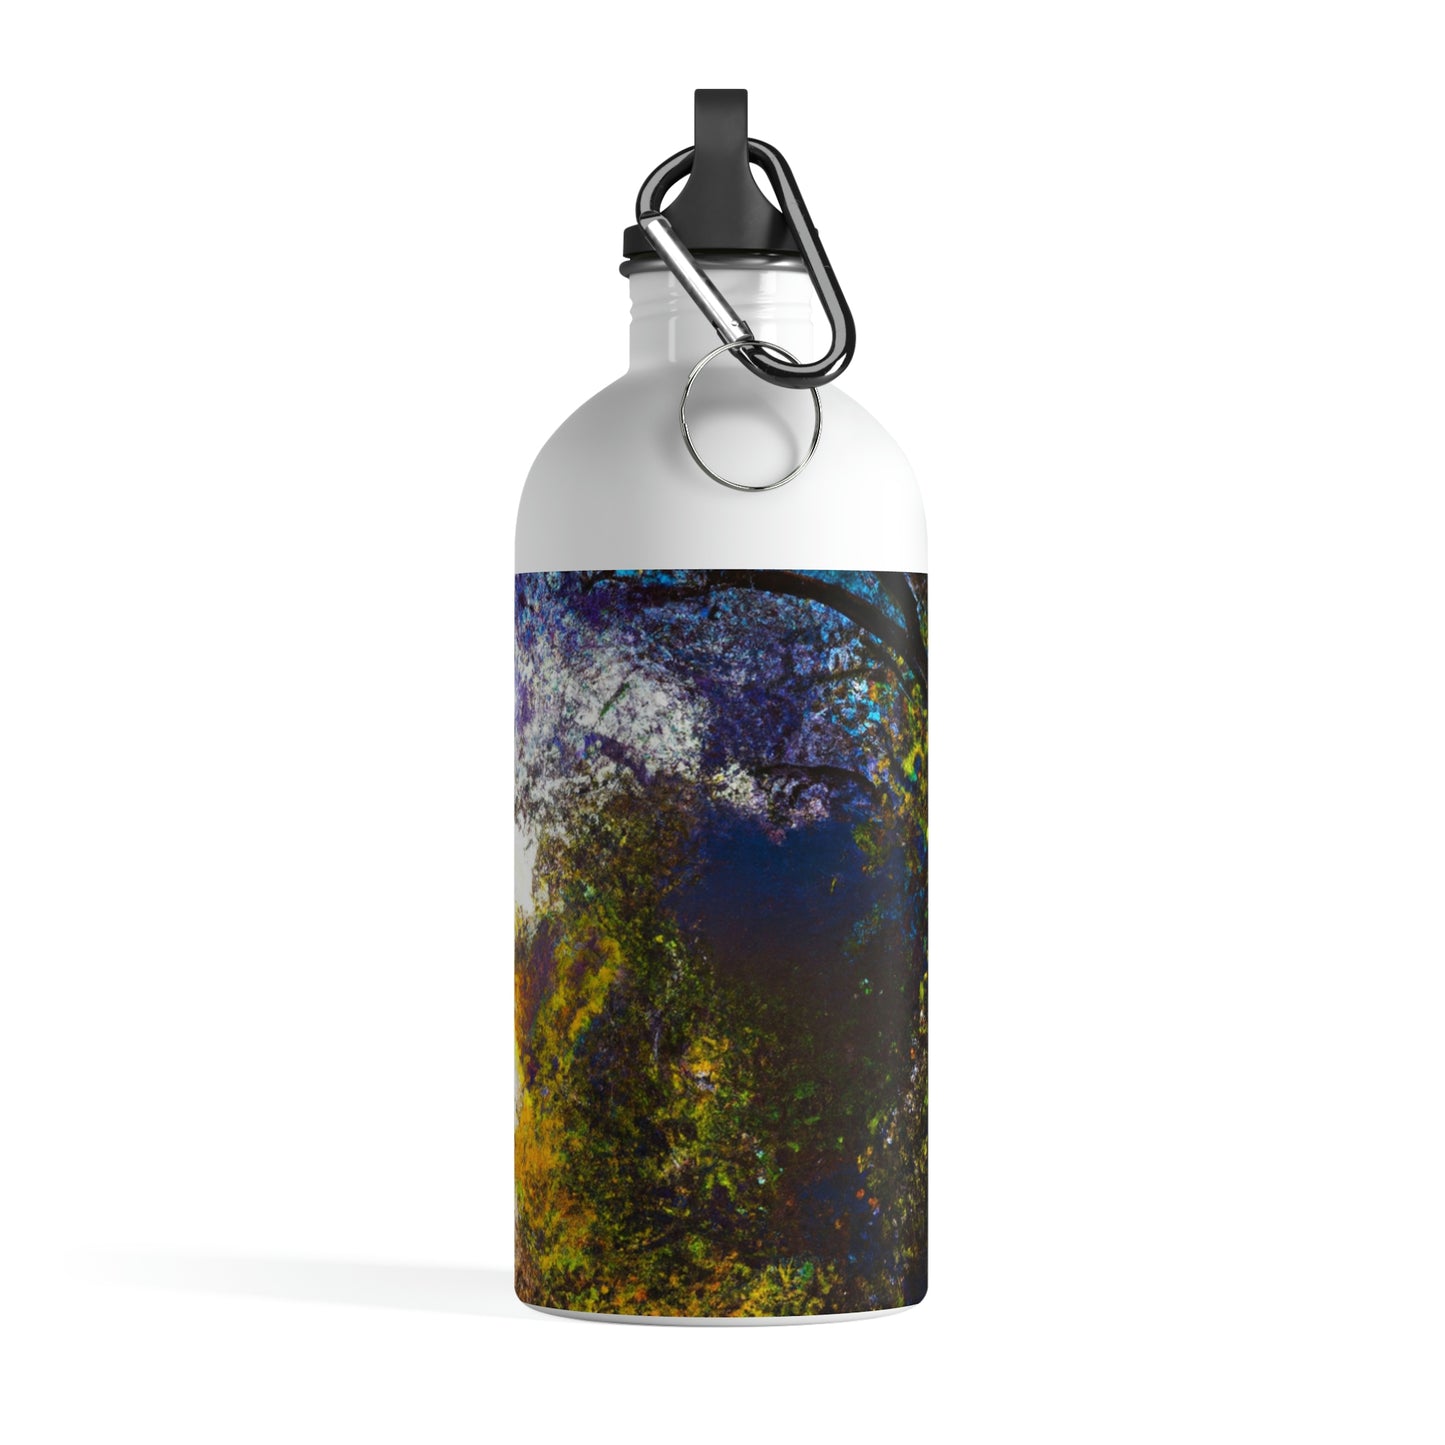 "A Beam of Light on a Forgotten Path" - The Alien Stainless Steel Water Bottle